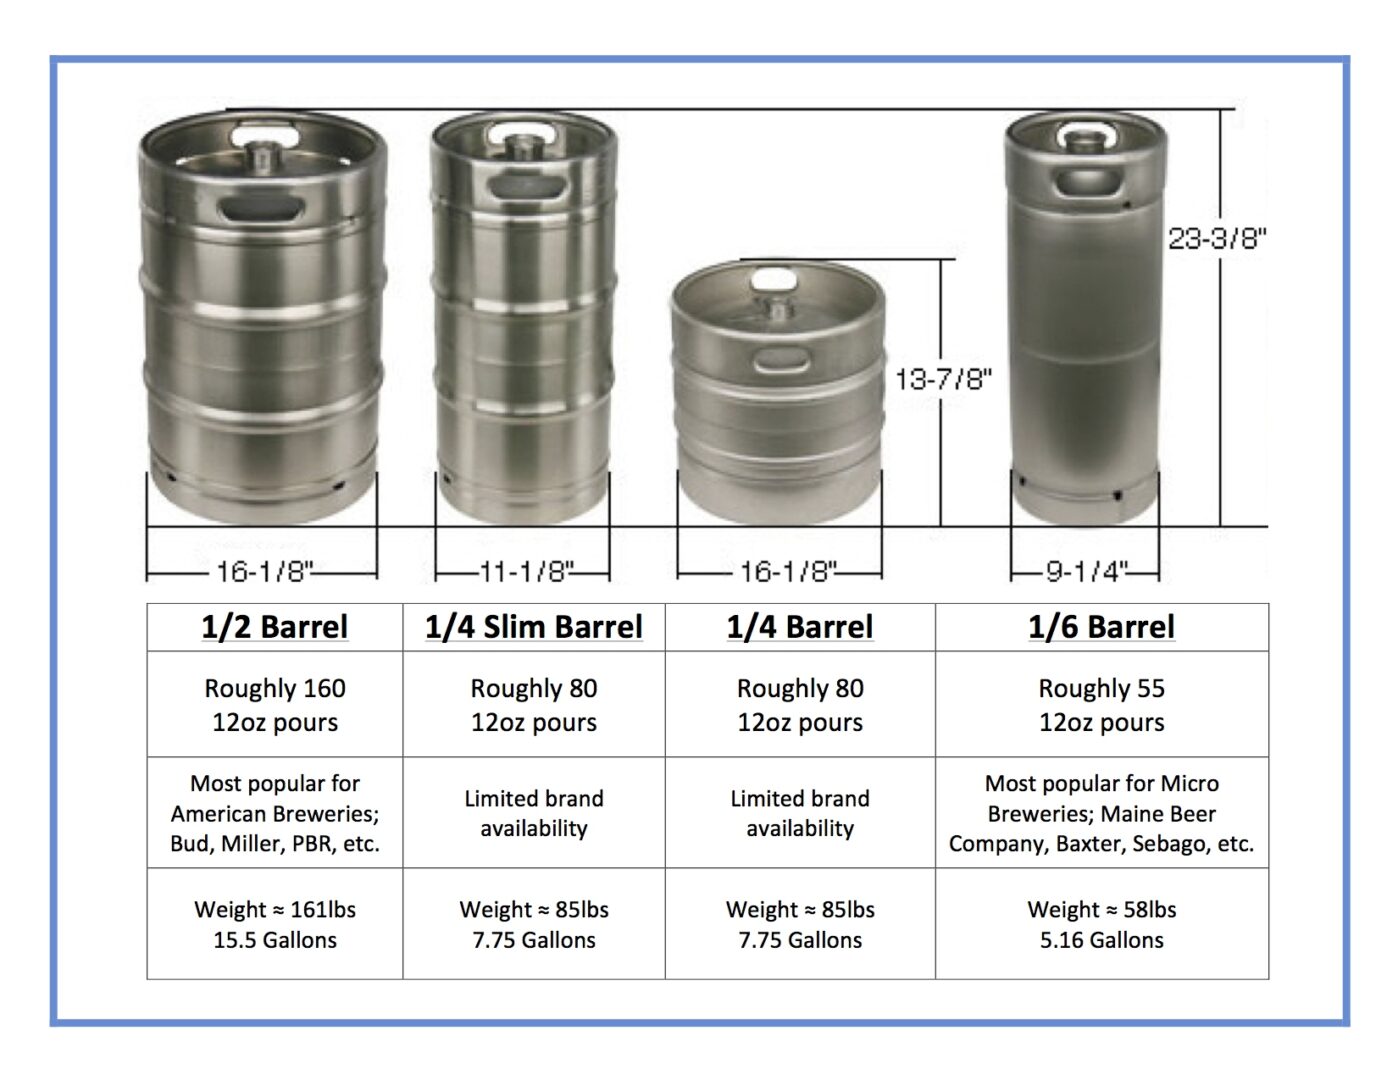 Image depicting U.S. domestic draft beer barrel sizes and capacities